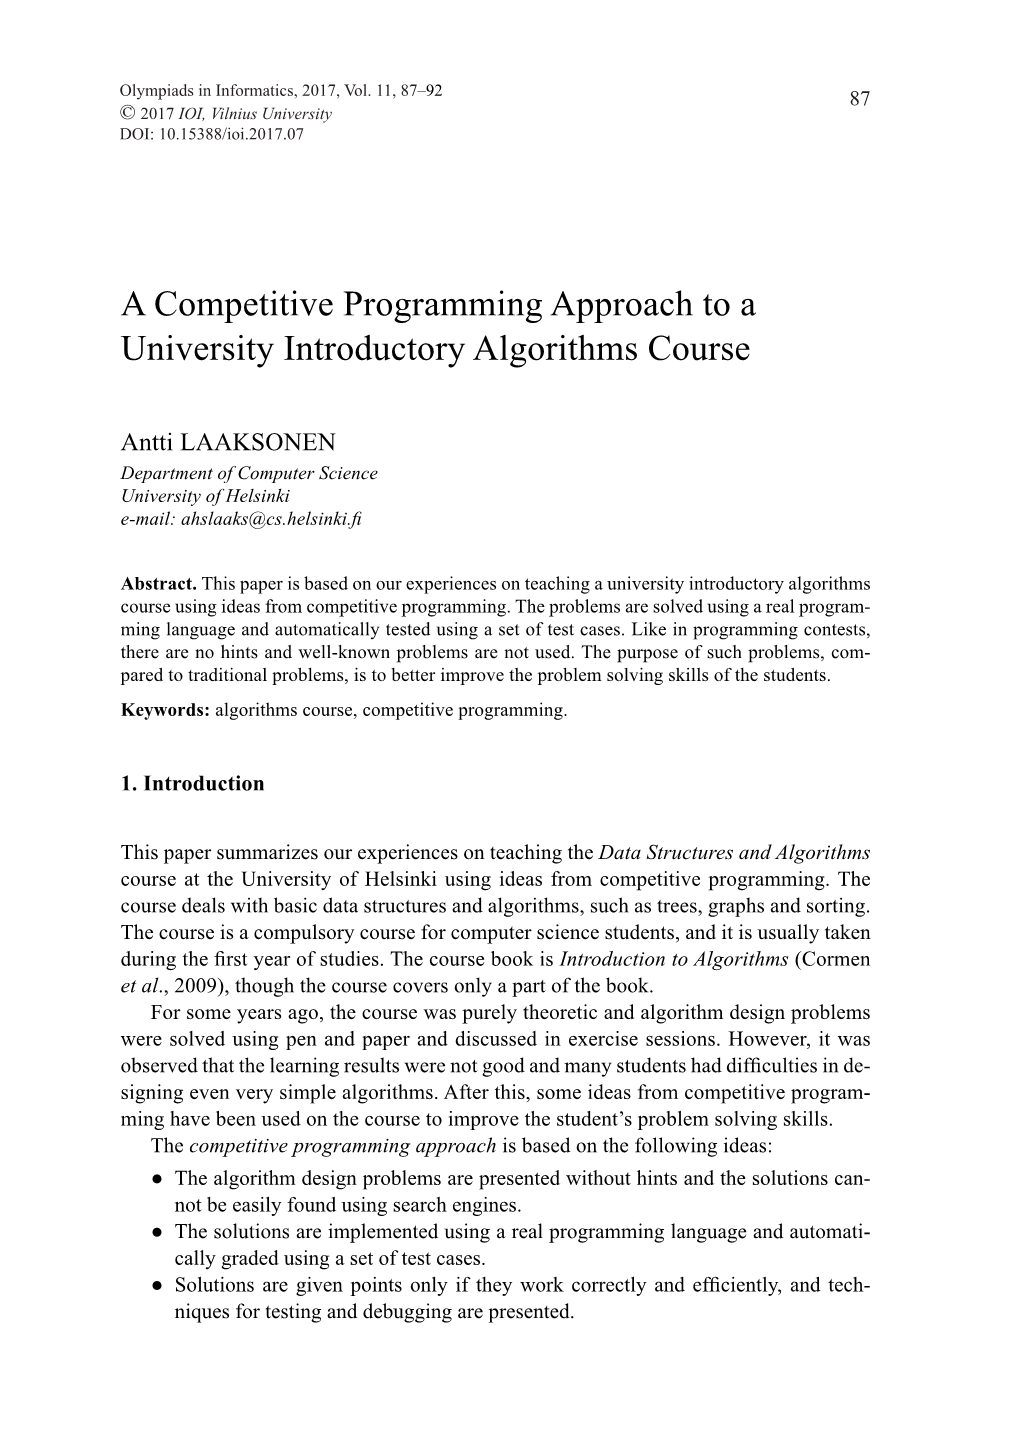 A Competitive Programming Approach to a University Introductory Algorithms Course